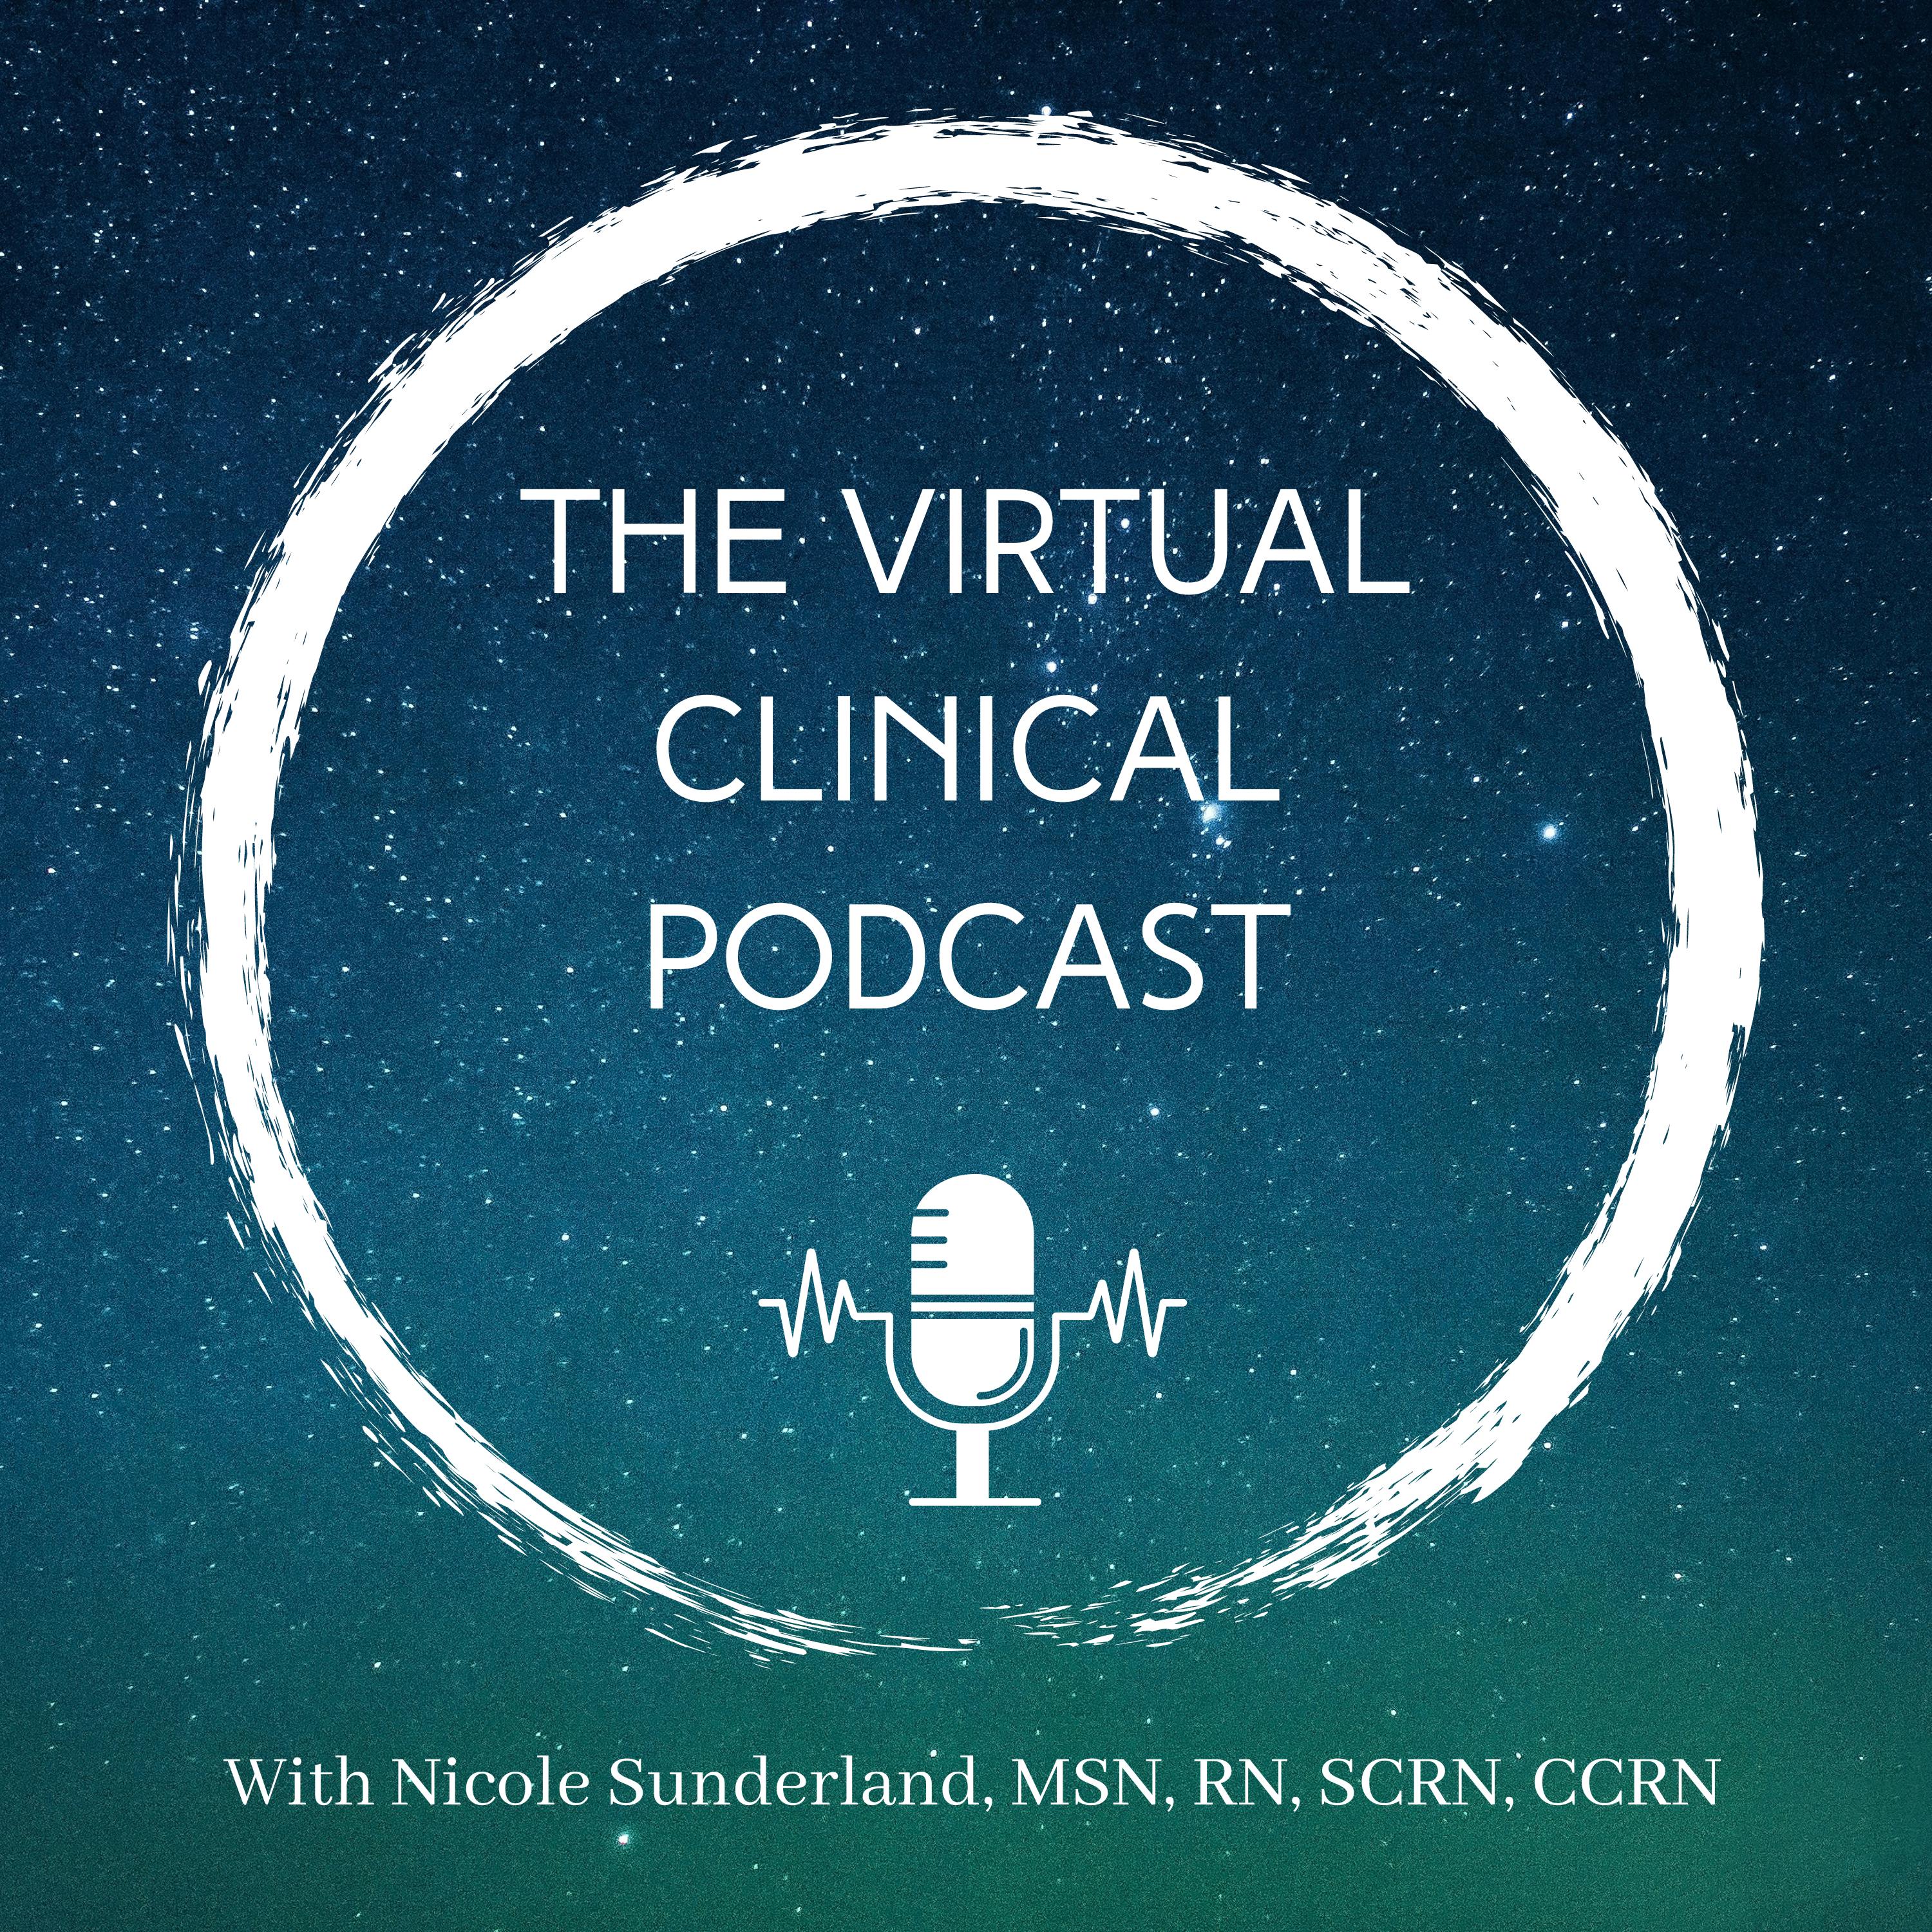 S1 Ep3 CRNA School with Shelbi Smith, BSN, RN, CCRN